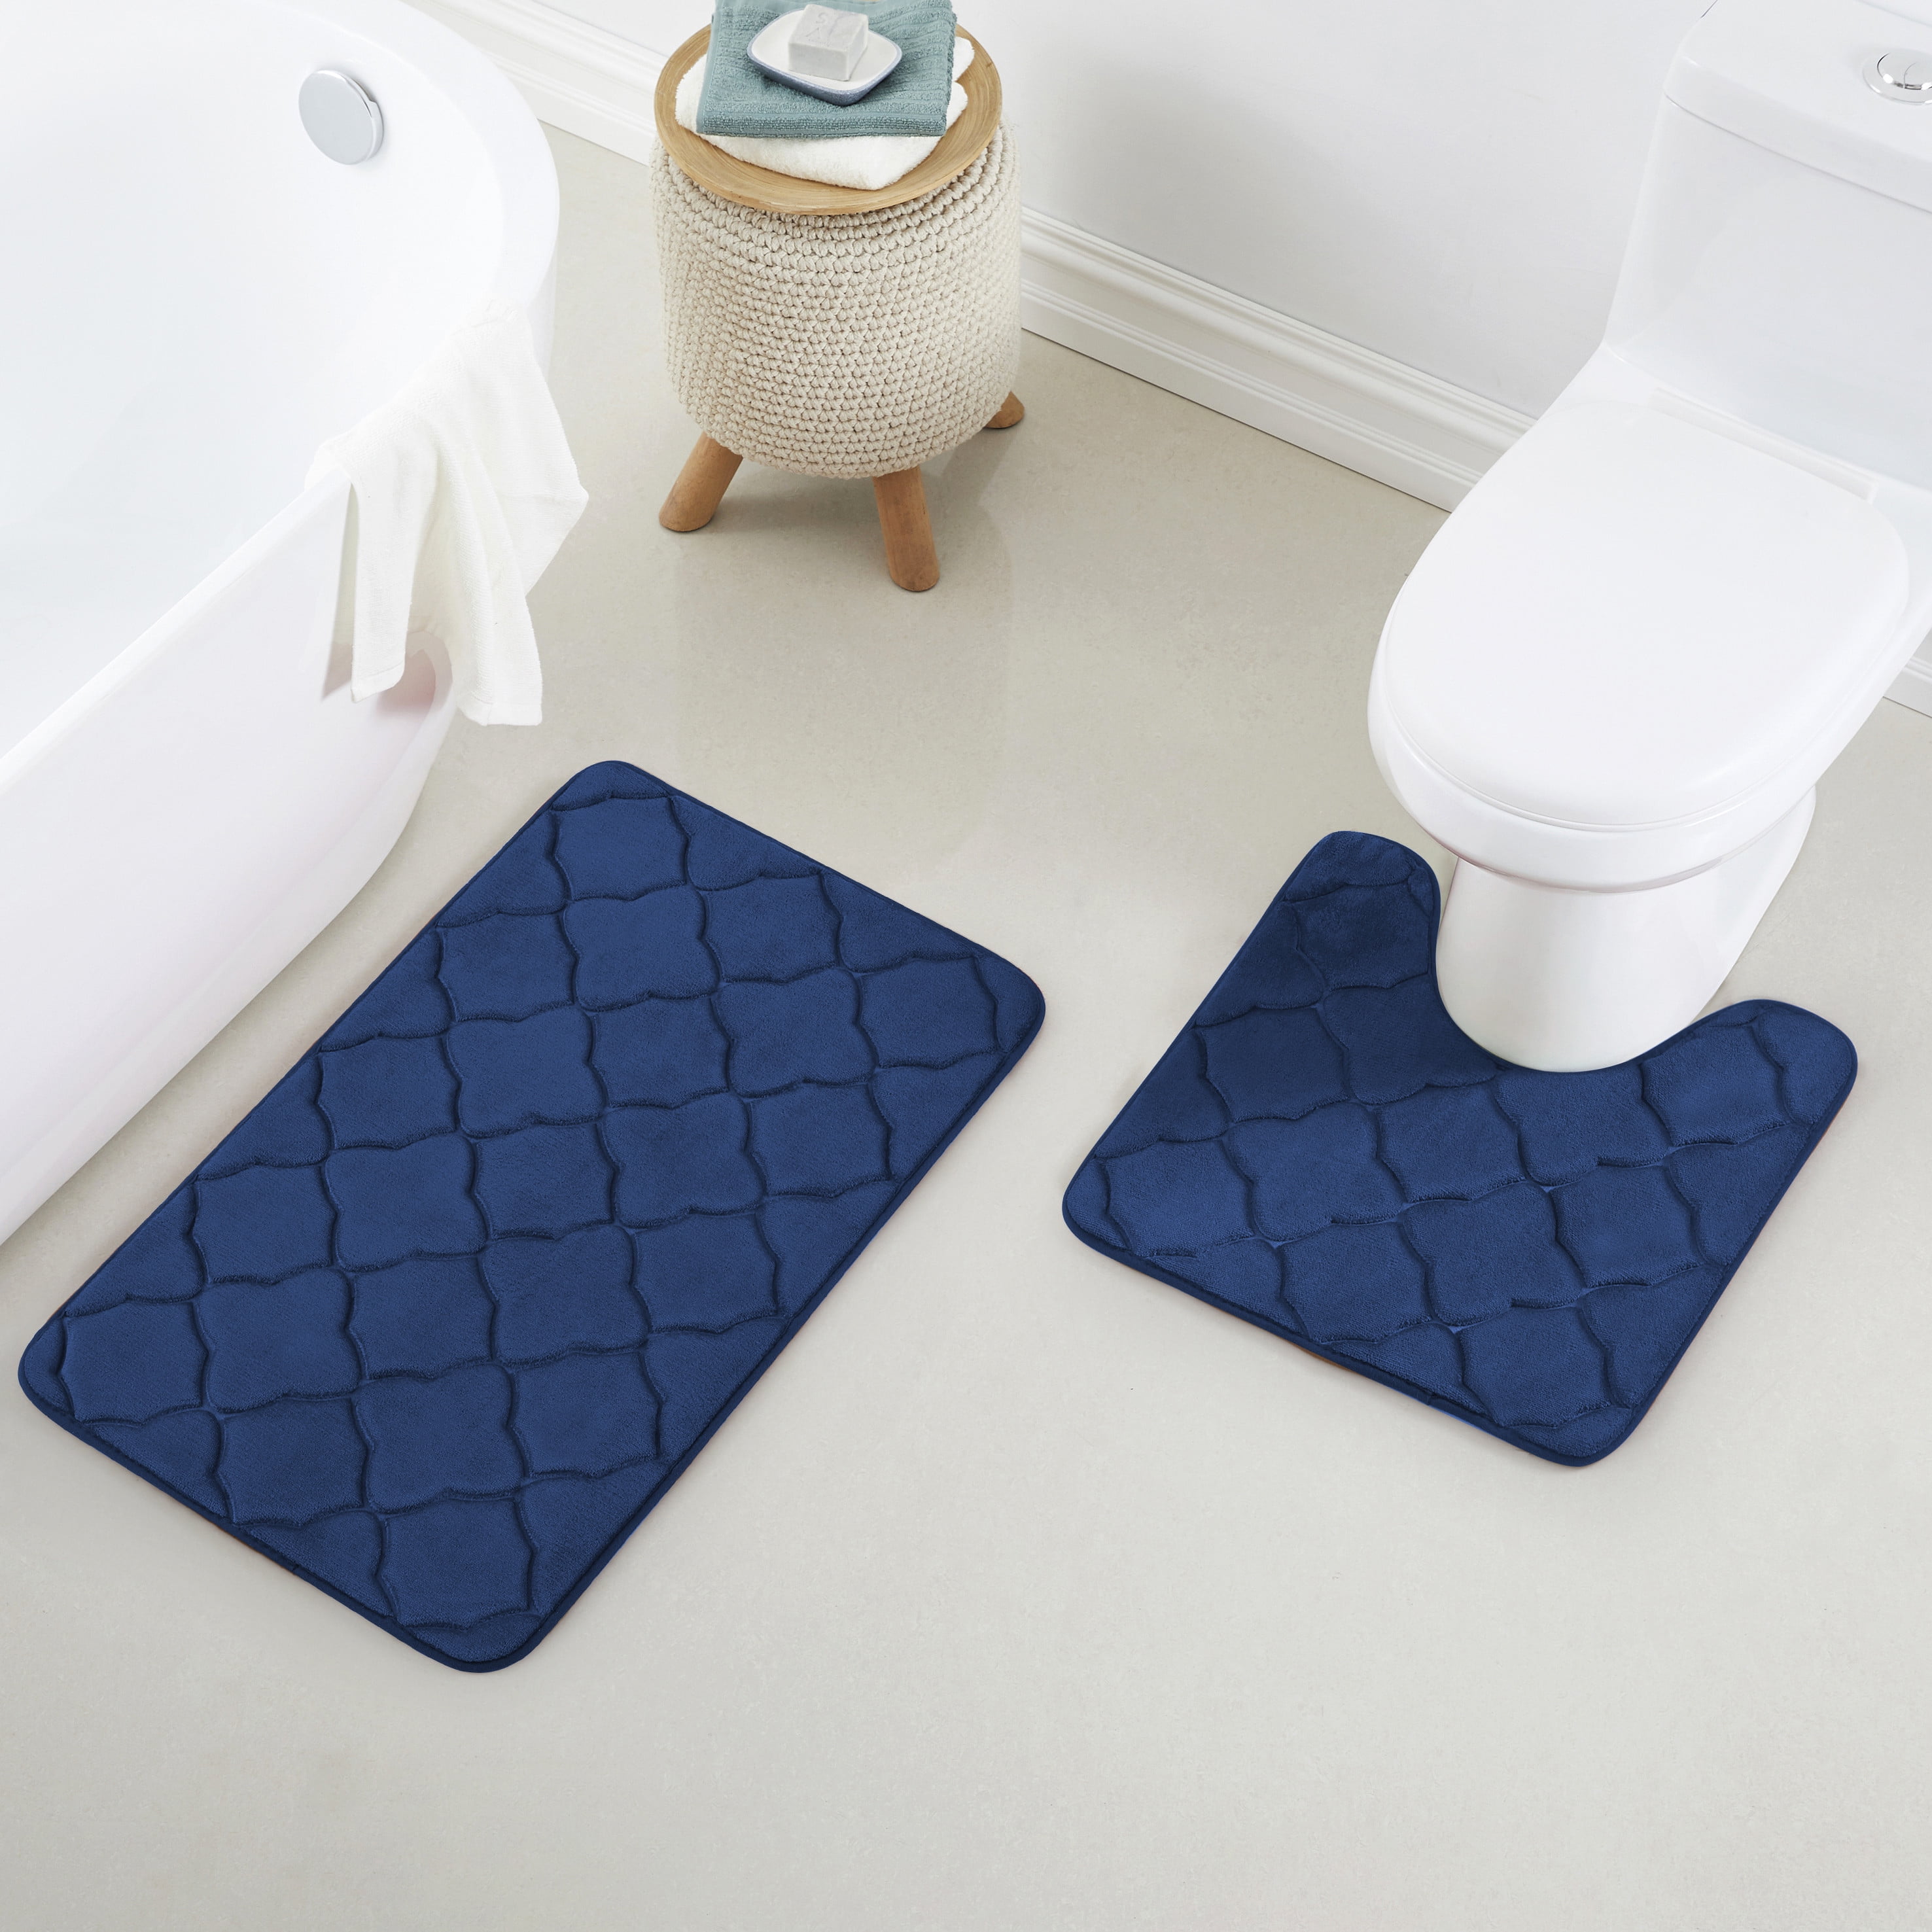 Bathroom Rug Set – 2-piece Memory Foam Bathmats With Microfiber Top –  Non-slip Absorbent Rugs For Shower, Laundry, Or Kitchen By Lavish Home  (gray) : Target